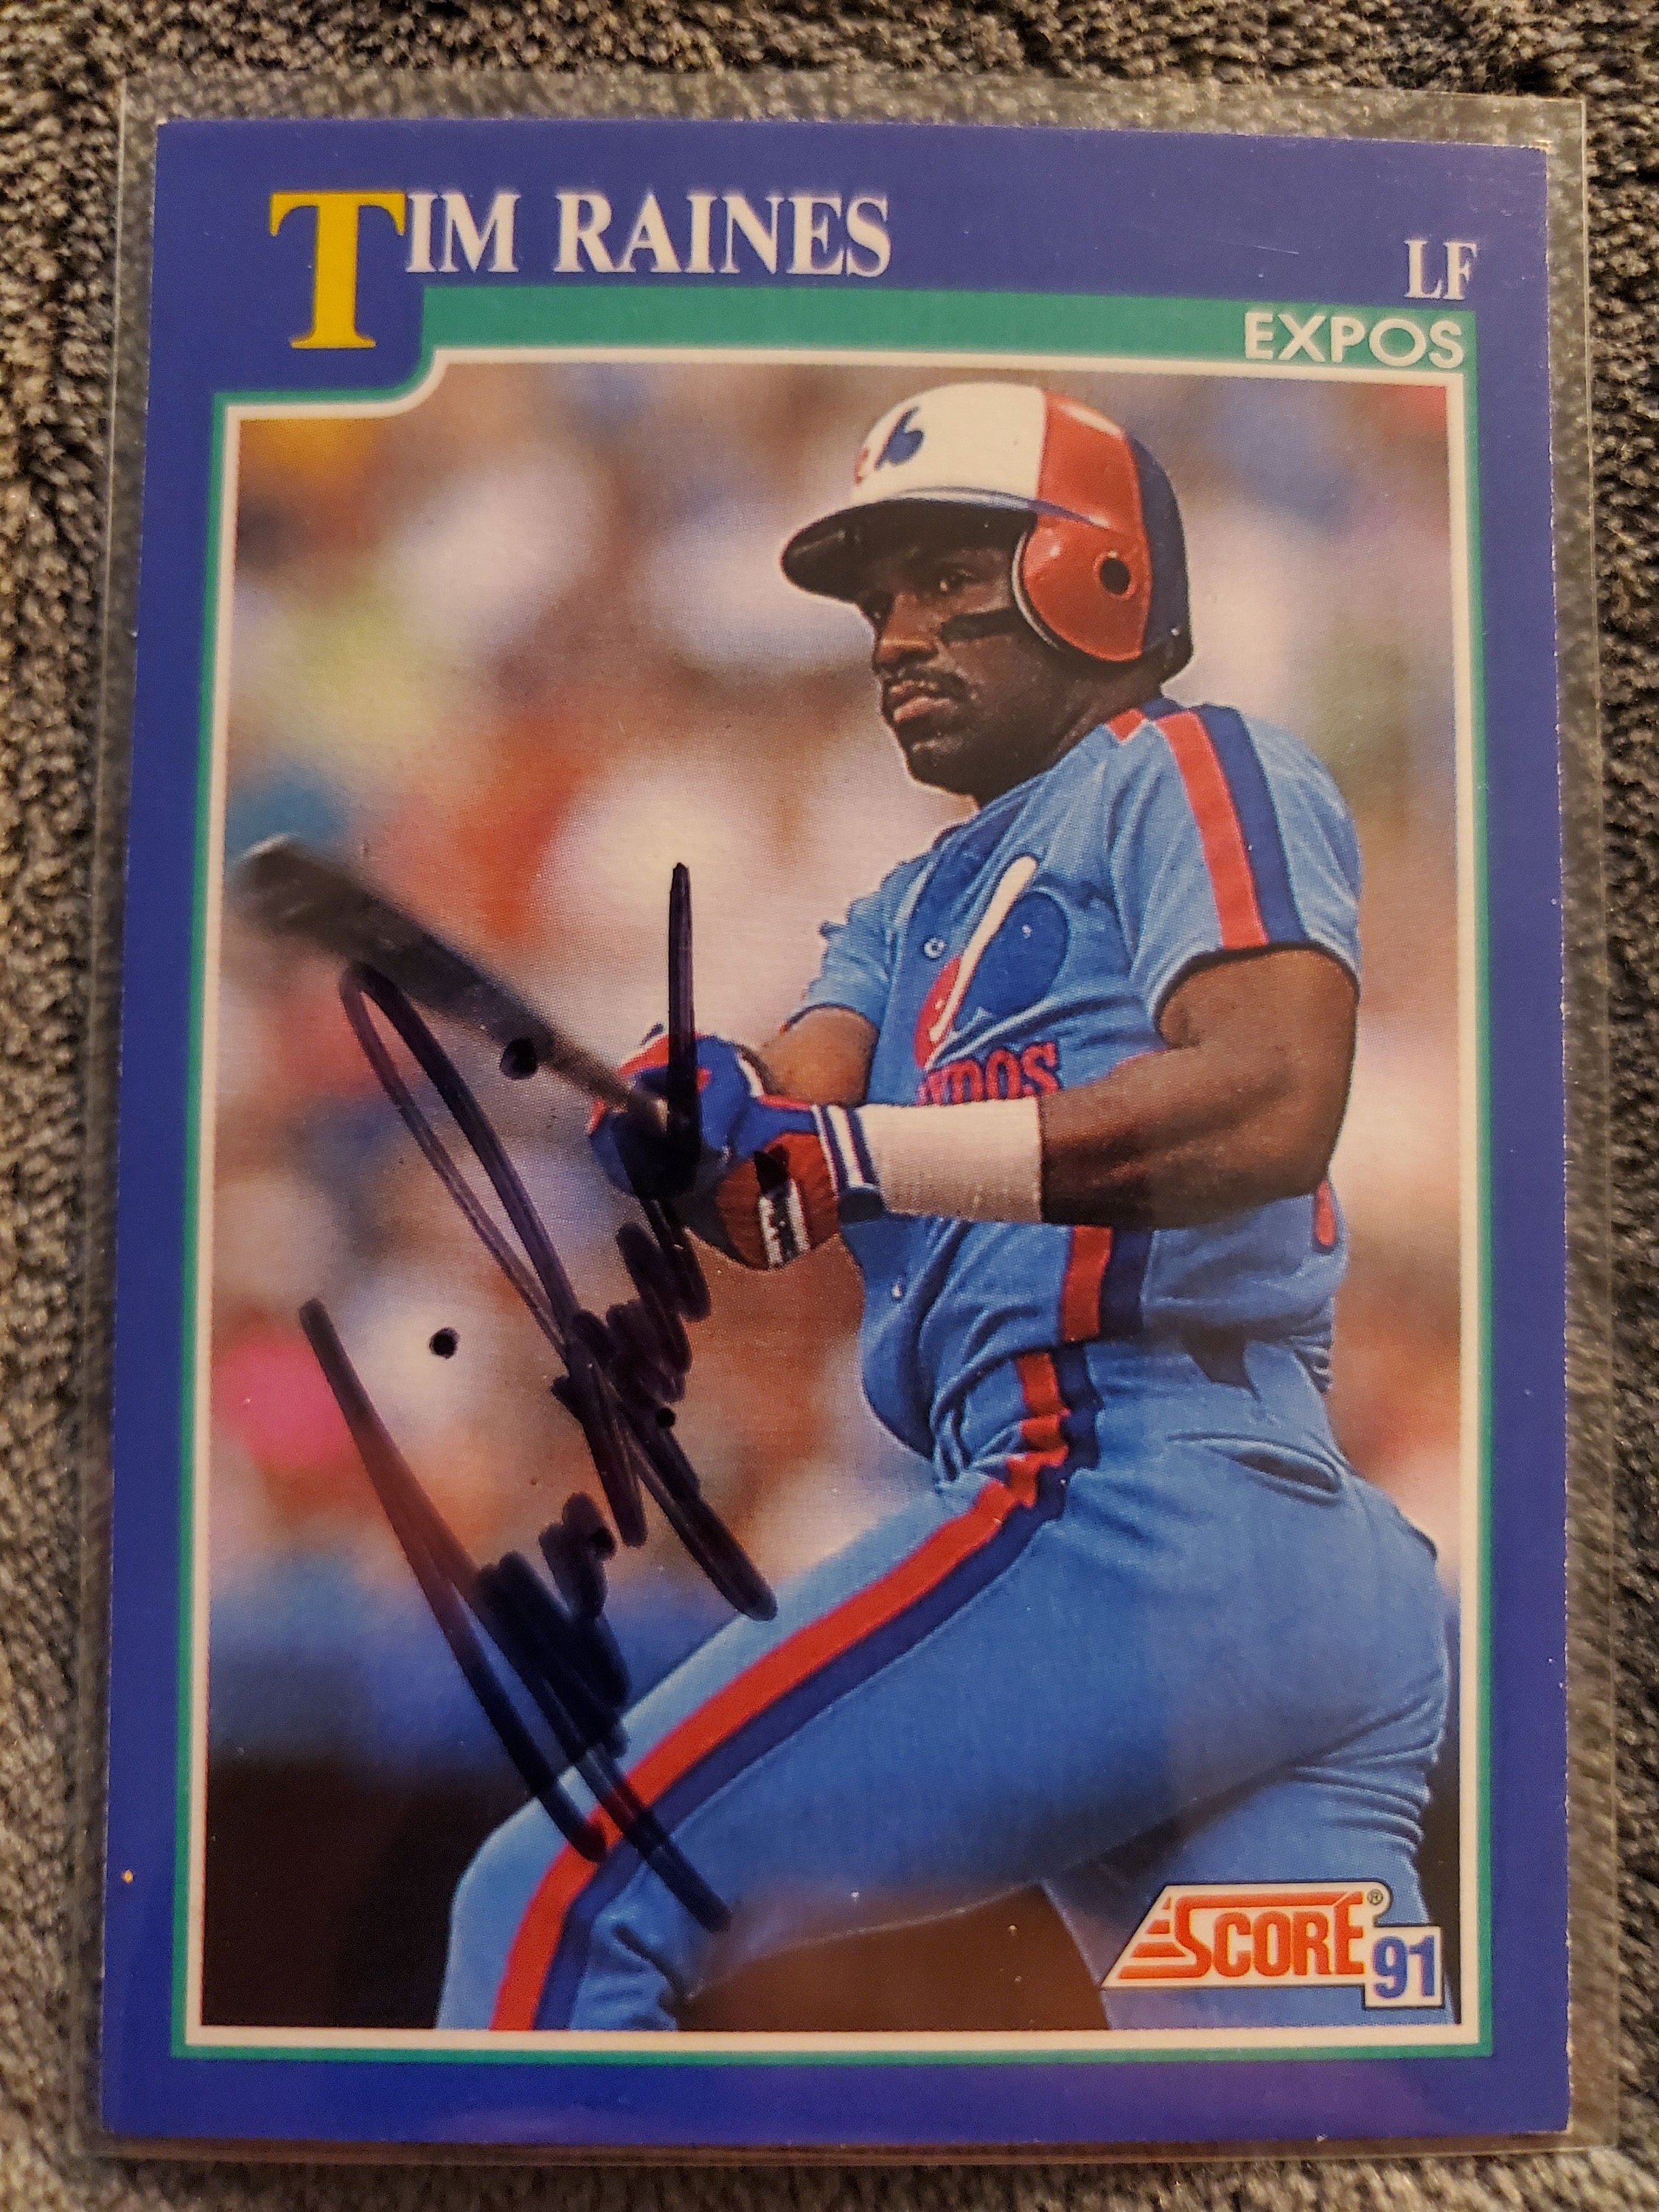 Top Tim Raines Baseball Cards, Rookies, Autographs, Inserts